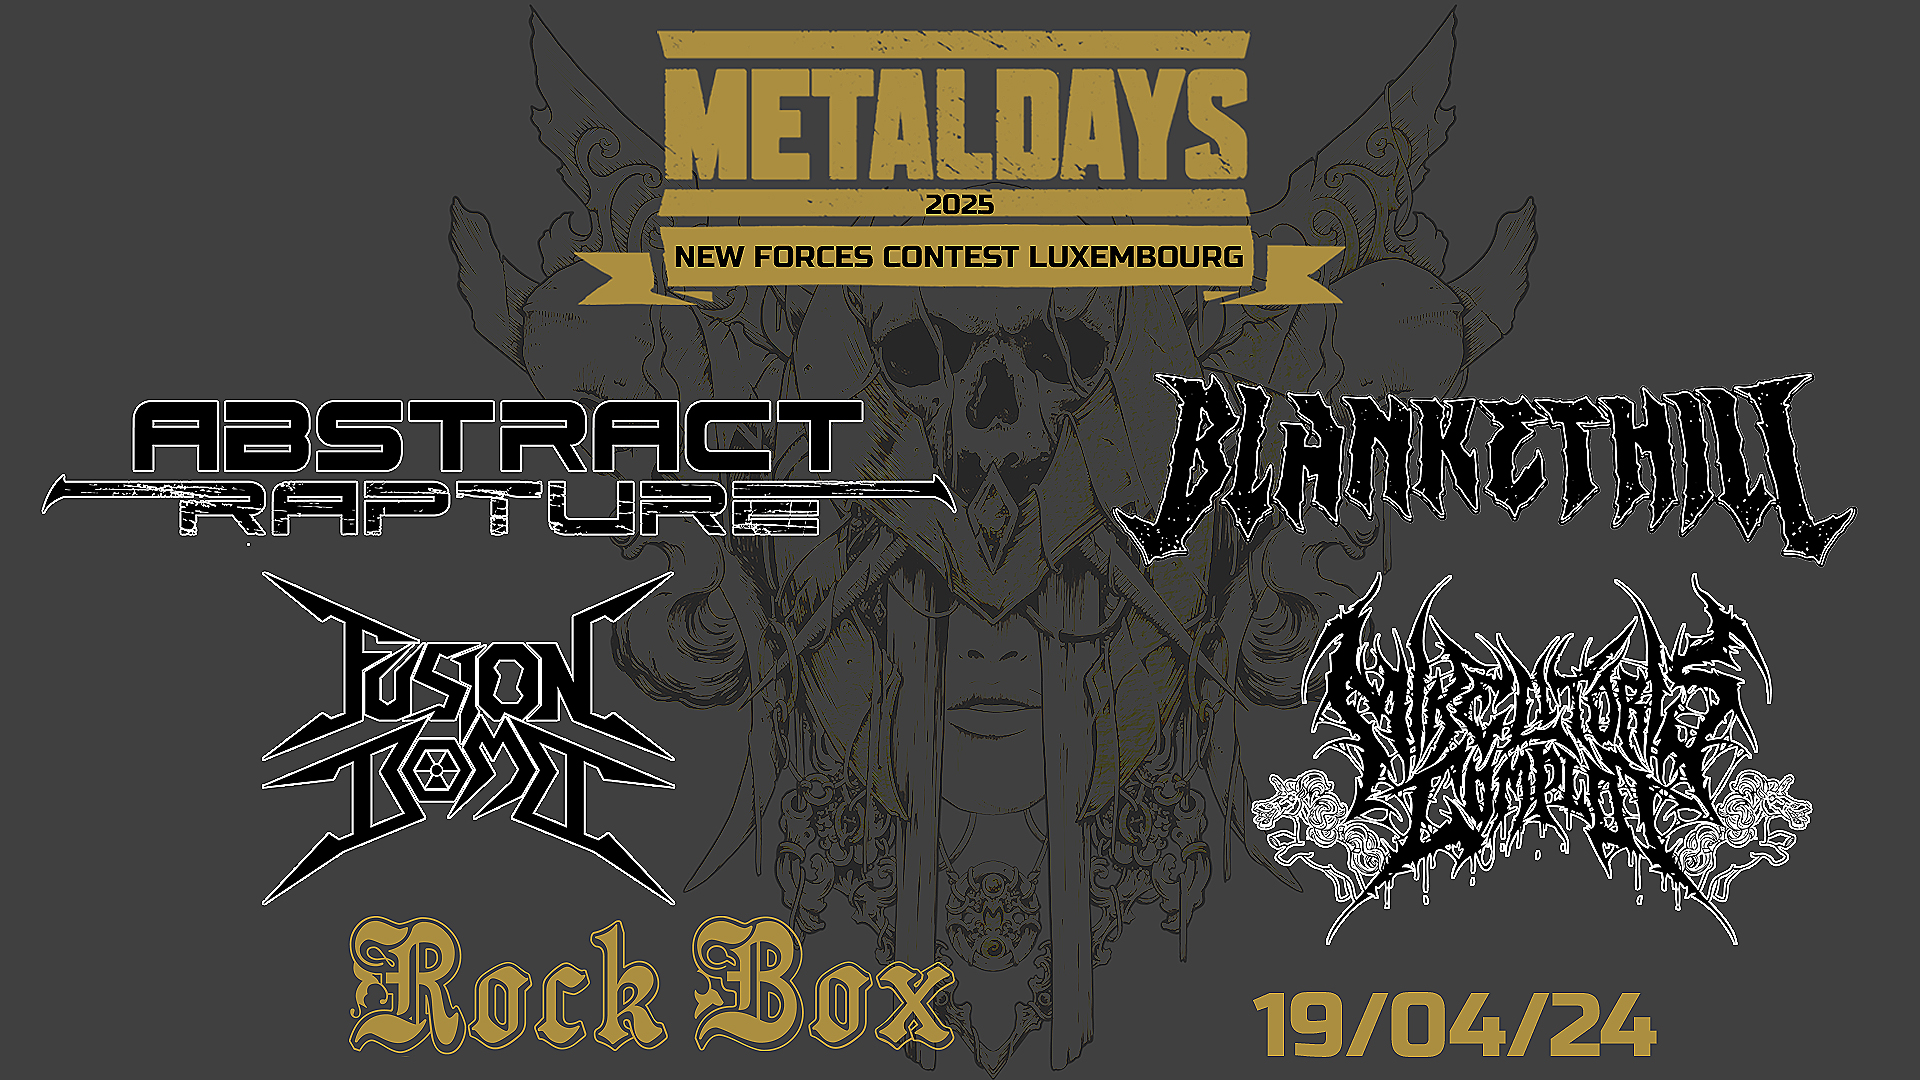 Metal Days 2025 New Forces Contest Luxembourg!